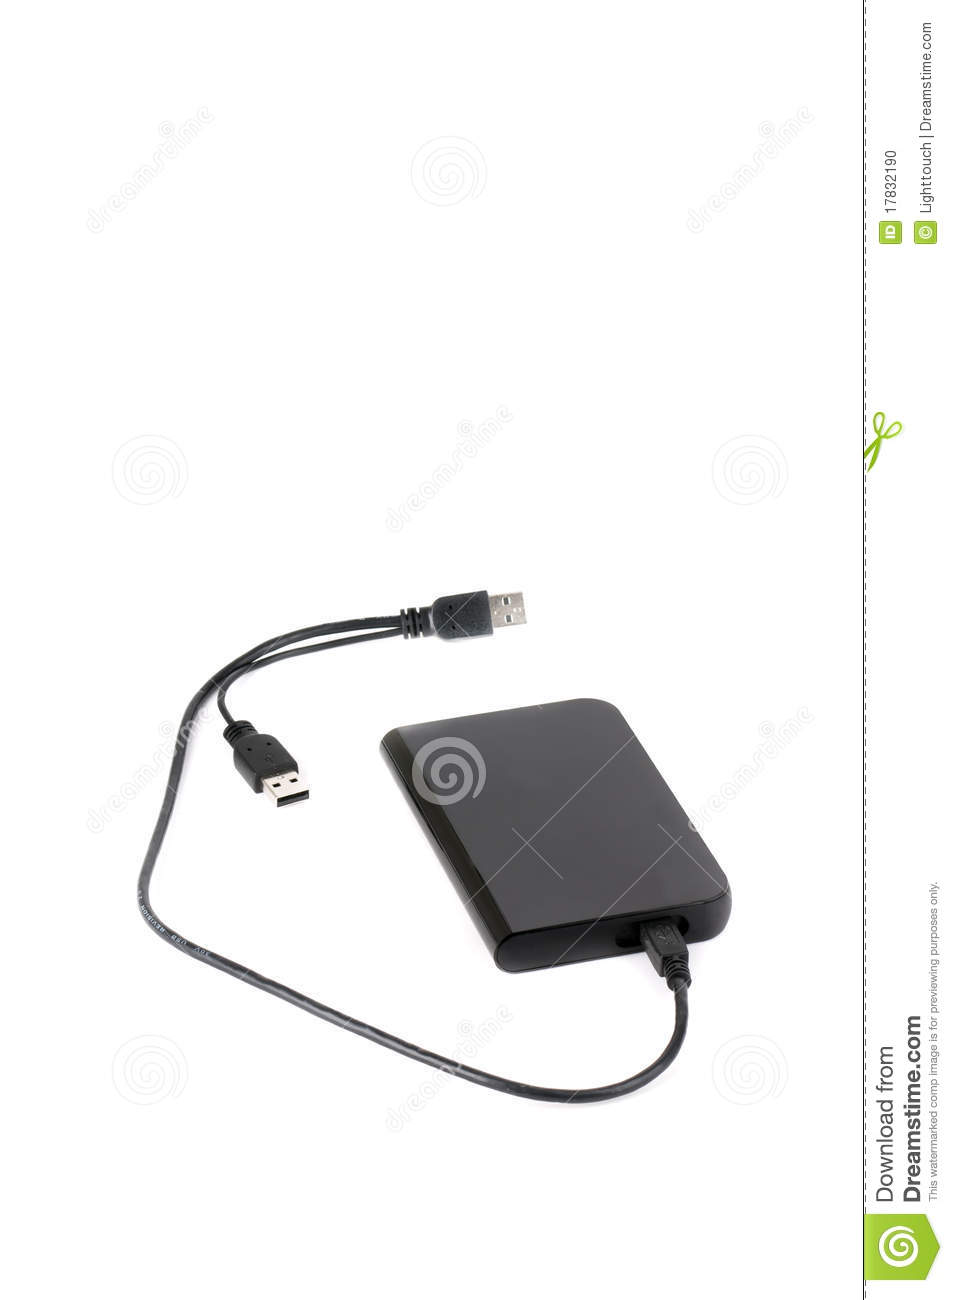 Portable External Hard Disk Drive With Usb Cable On White Background 